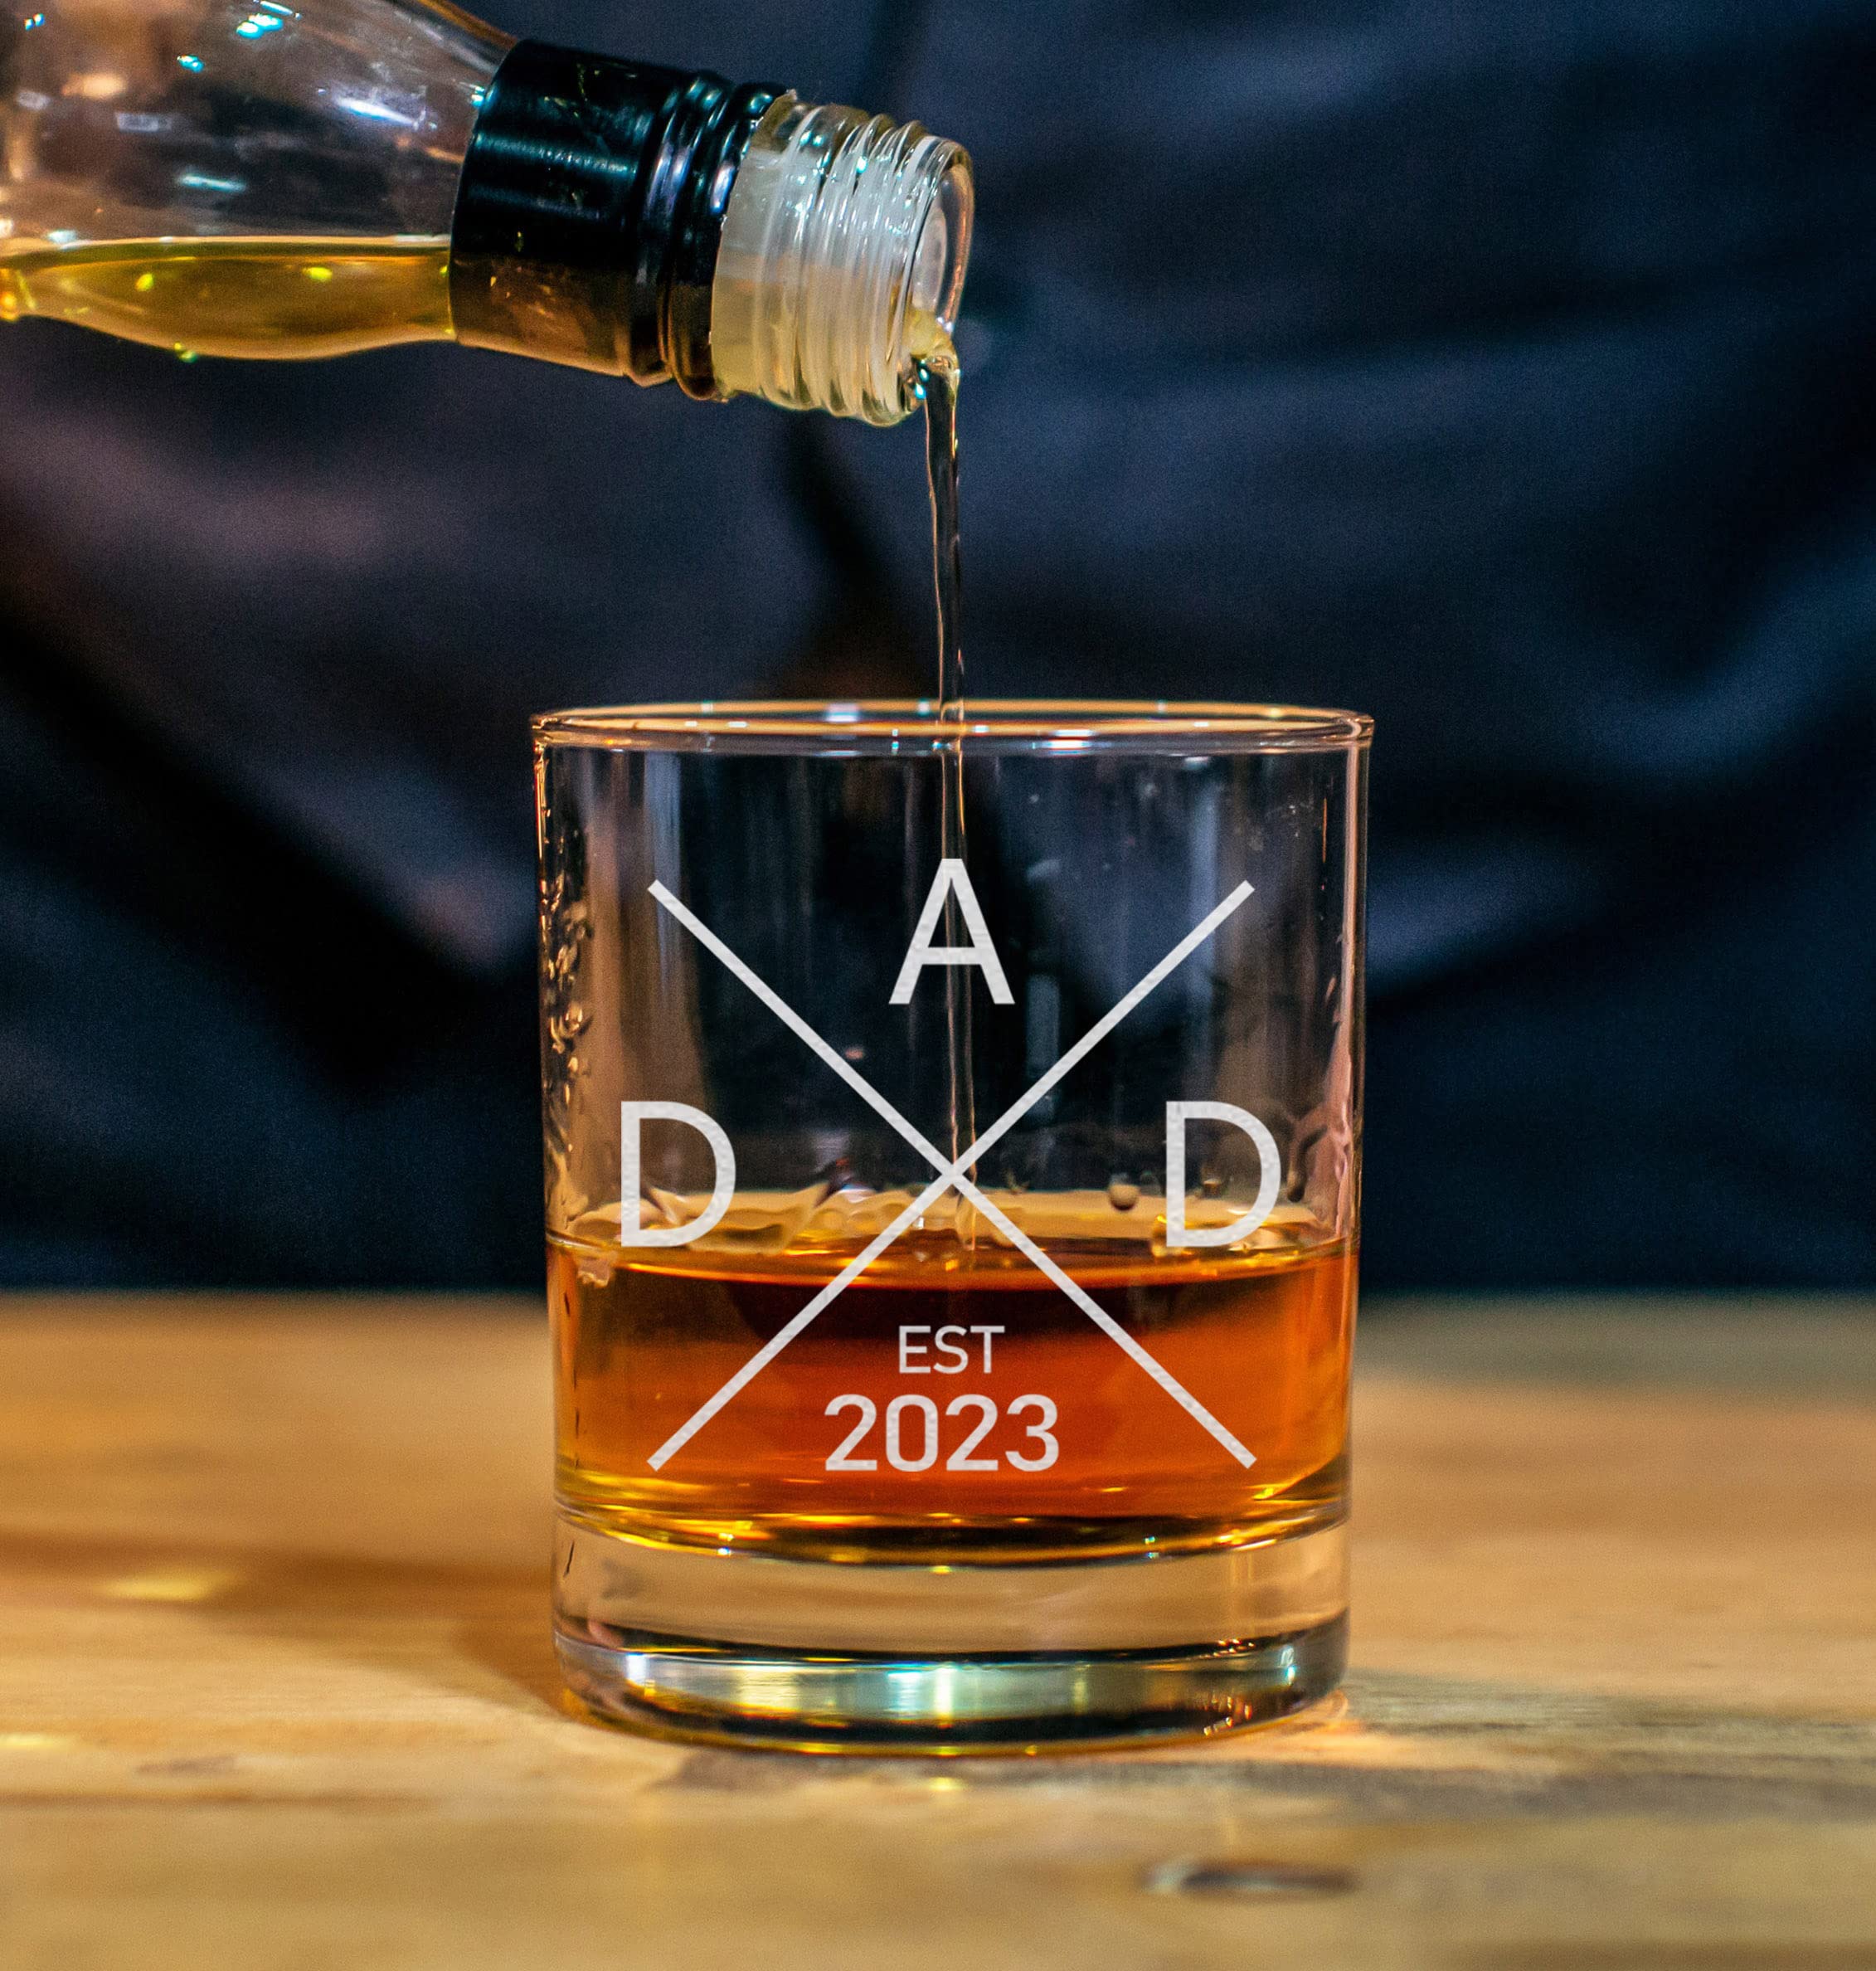 CARVELITA Dad Est 2023 Whiskey Glass - Pregnancy Announcements For Dad - 11oz Old Fashioned Bourbon Rocks Glass For Expecting Father - Dad To Be Gifts - Funny New Dad Gifts - First Time Dad Gifts